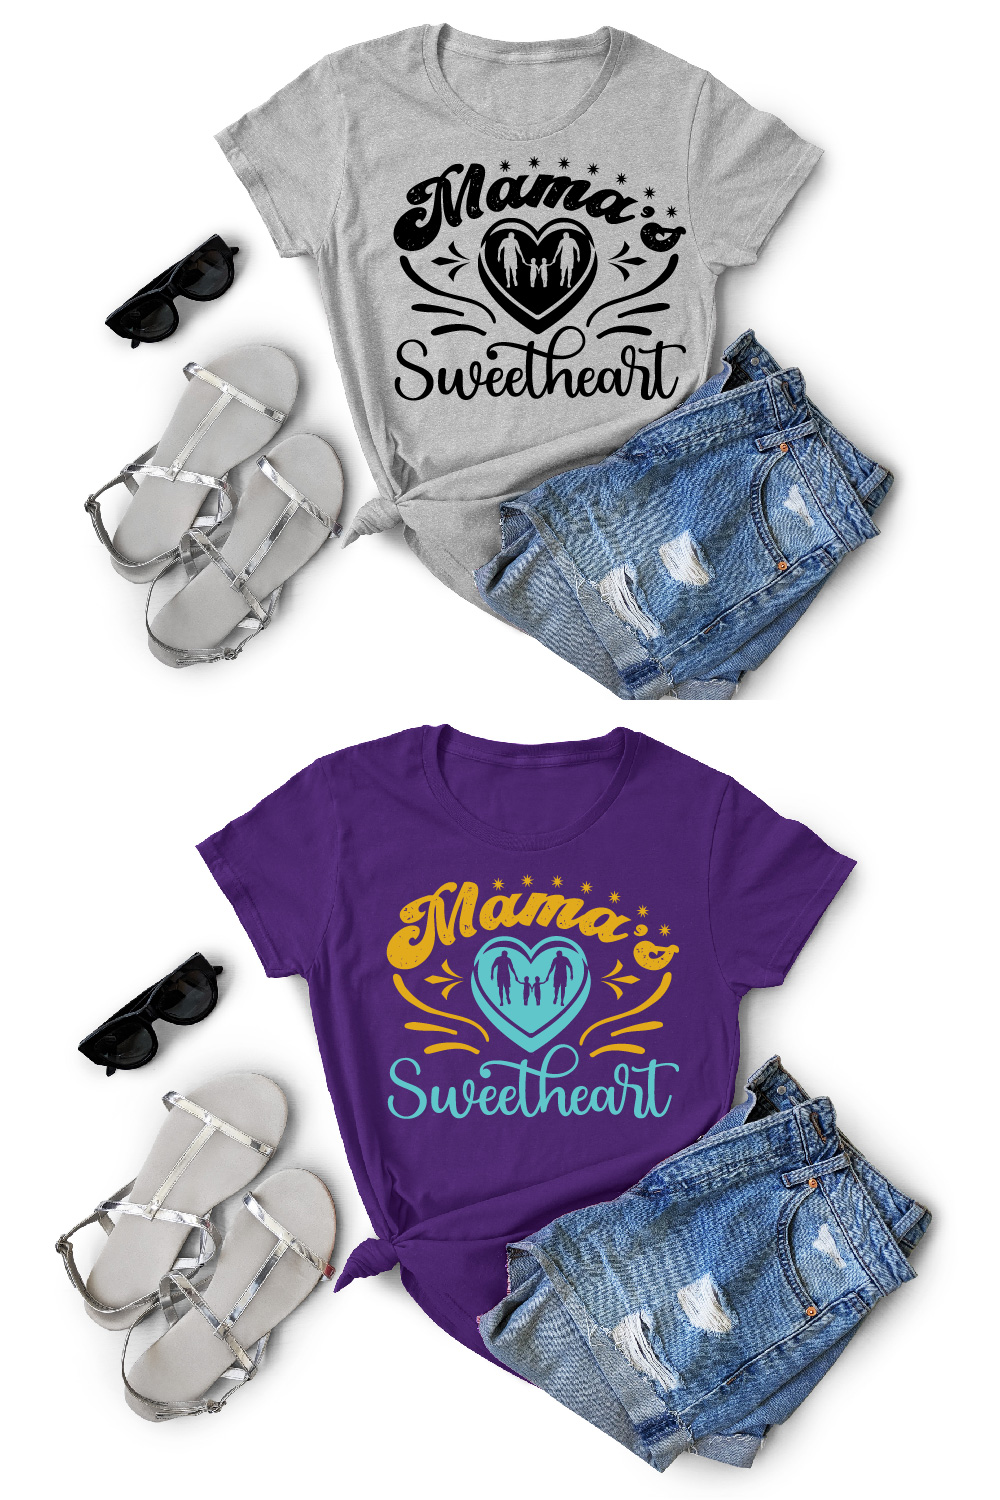 Mama ‘S Sweetheart T -Shirt Cut File pinterest preview image.